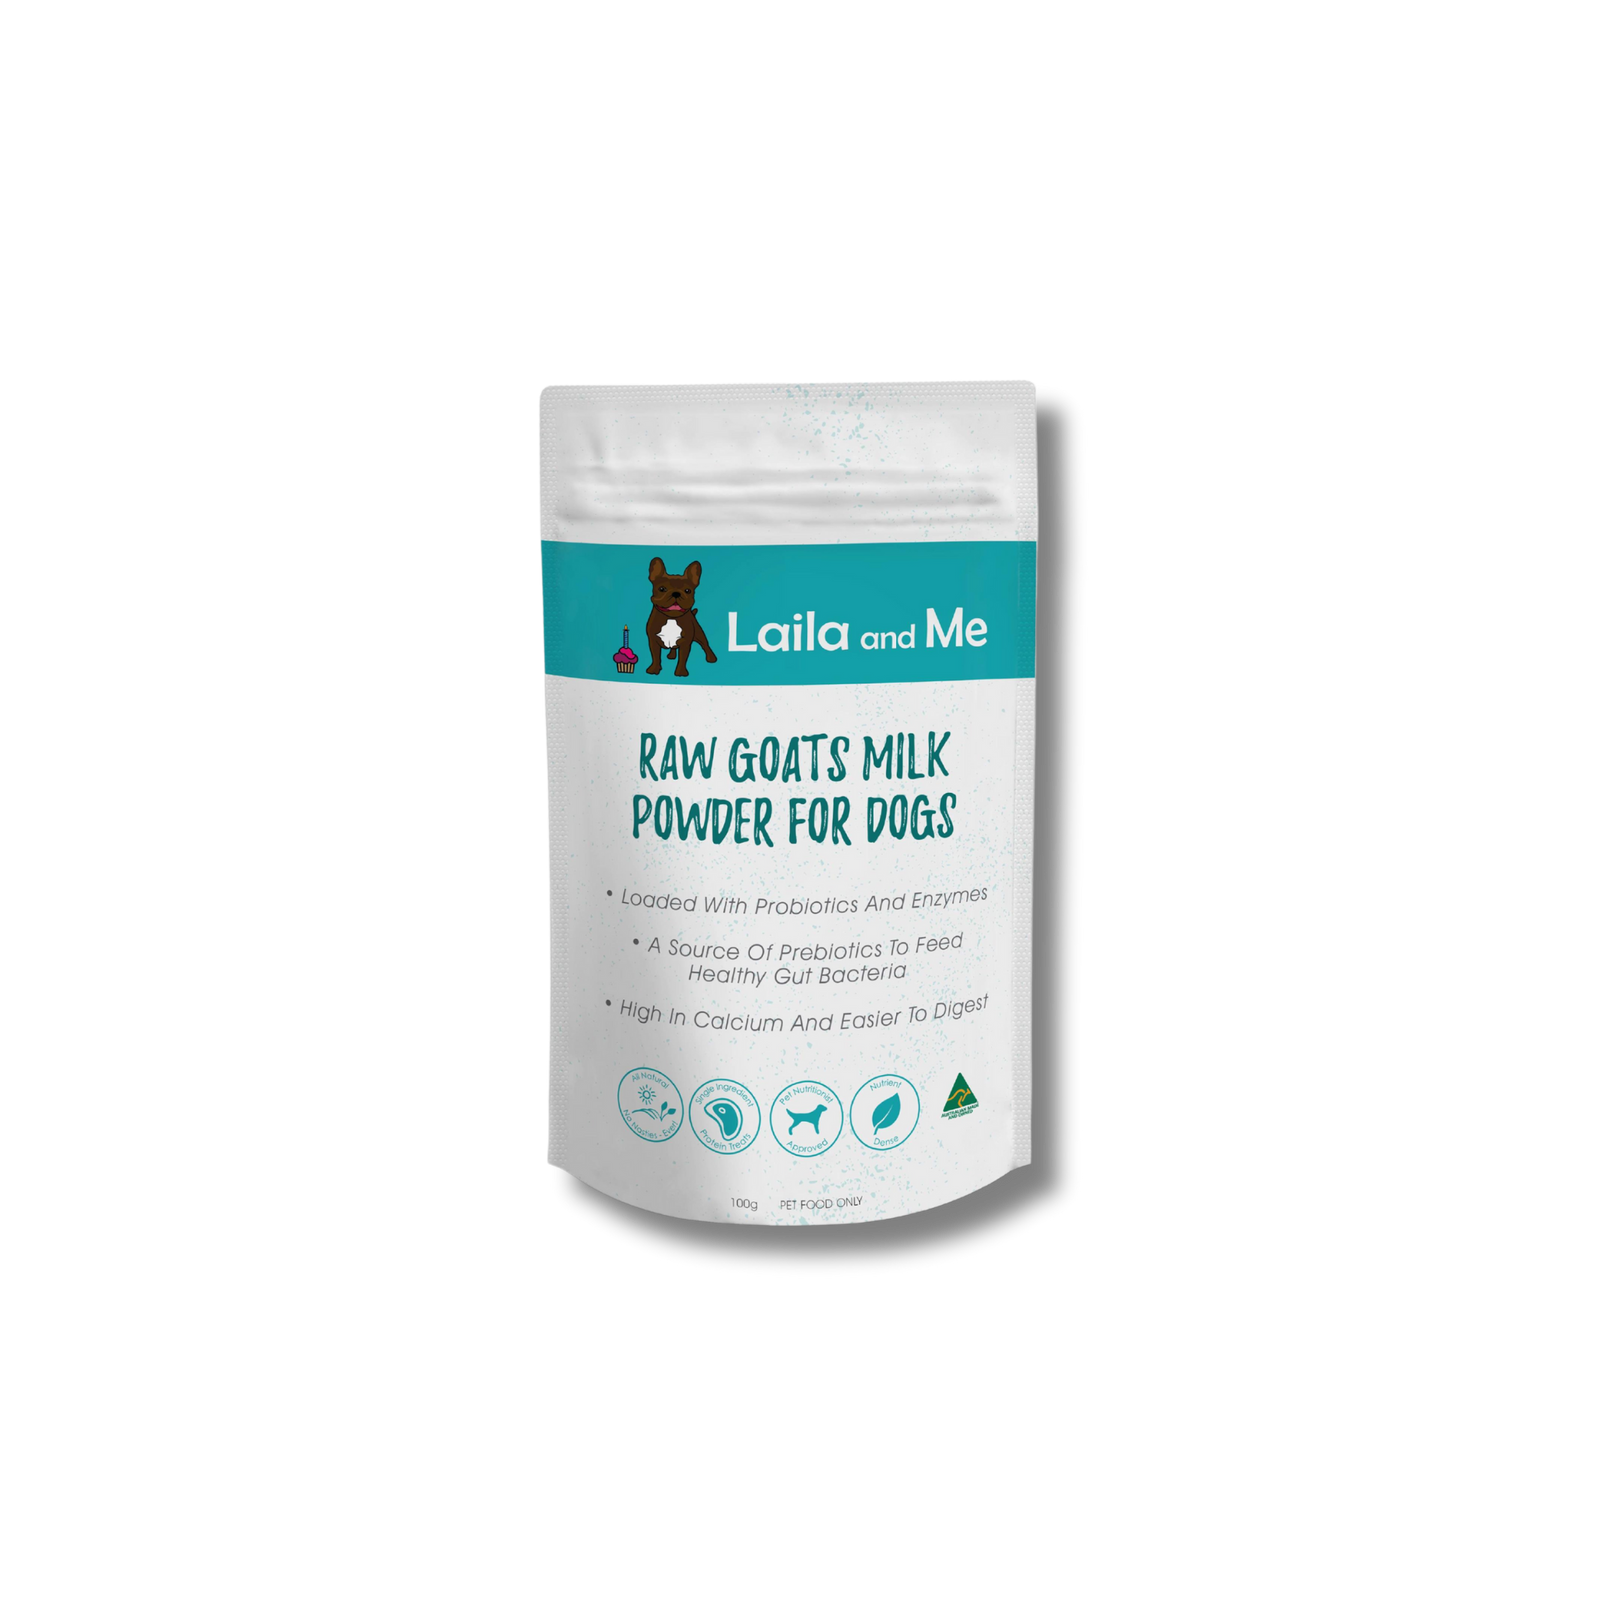 Raw Goats Milk Powder for Dogs - Laila and Me